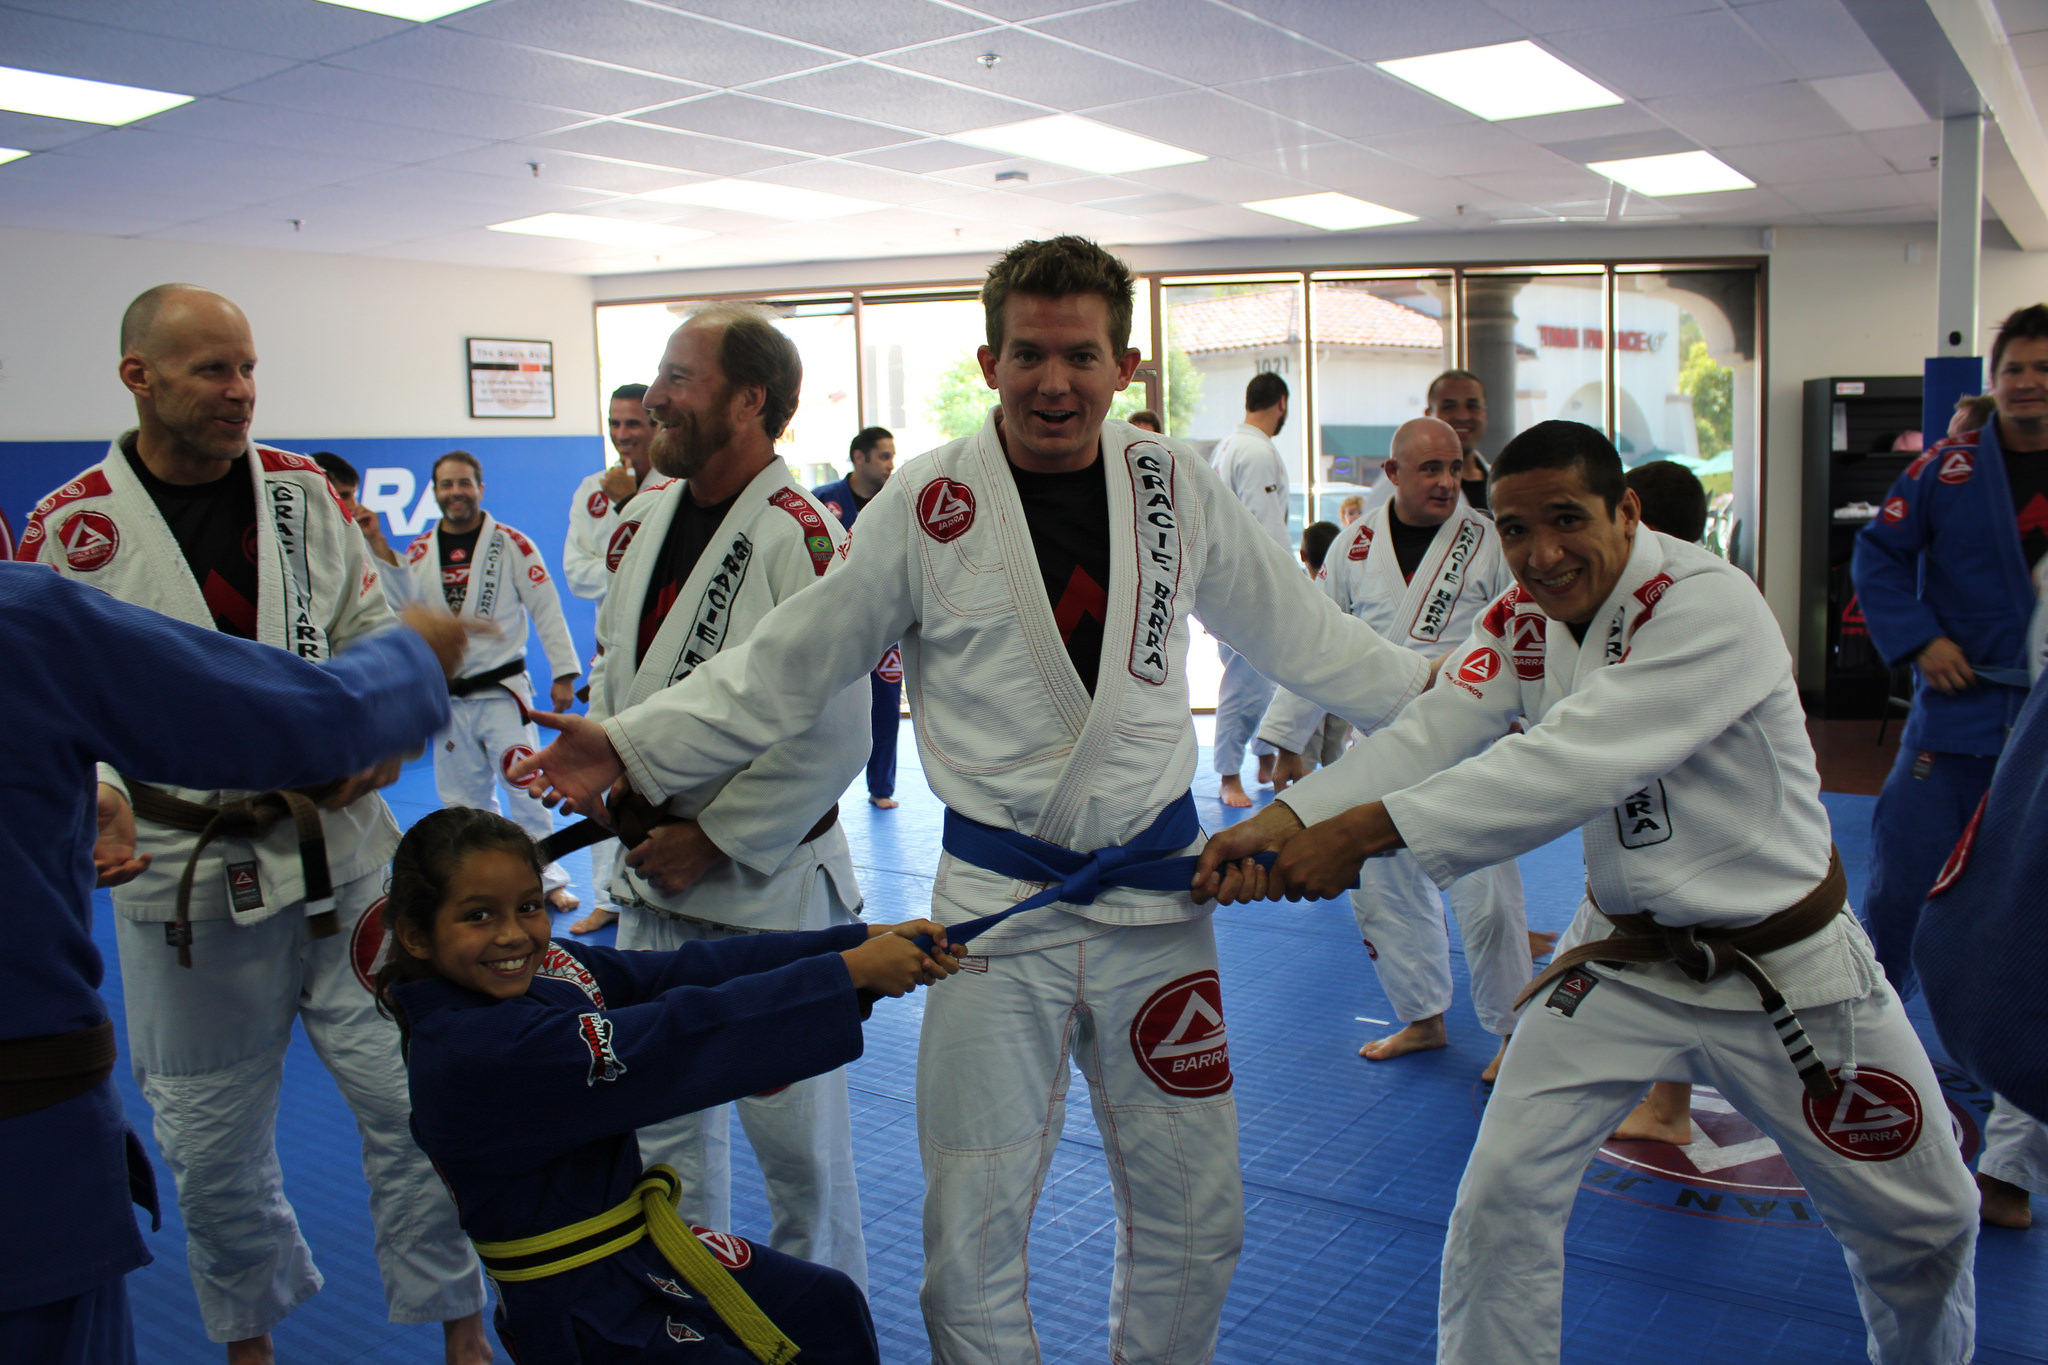 Do You Think You Are Ready For Your Blue Belt? An instructor's 4 Points